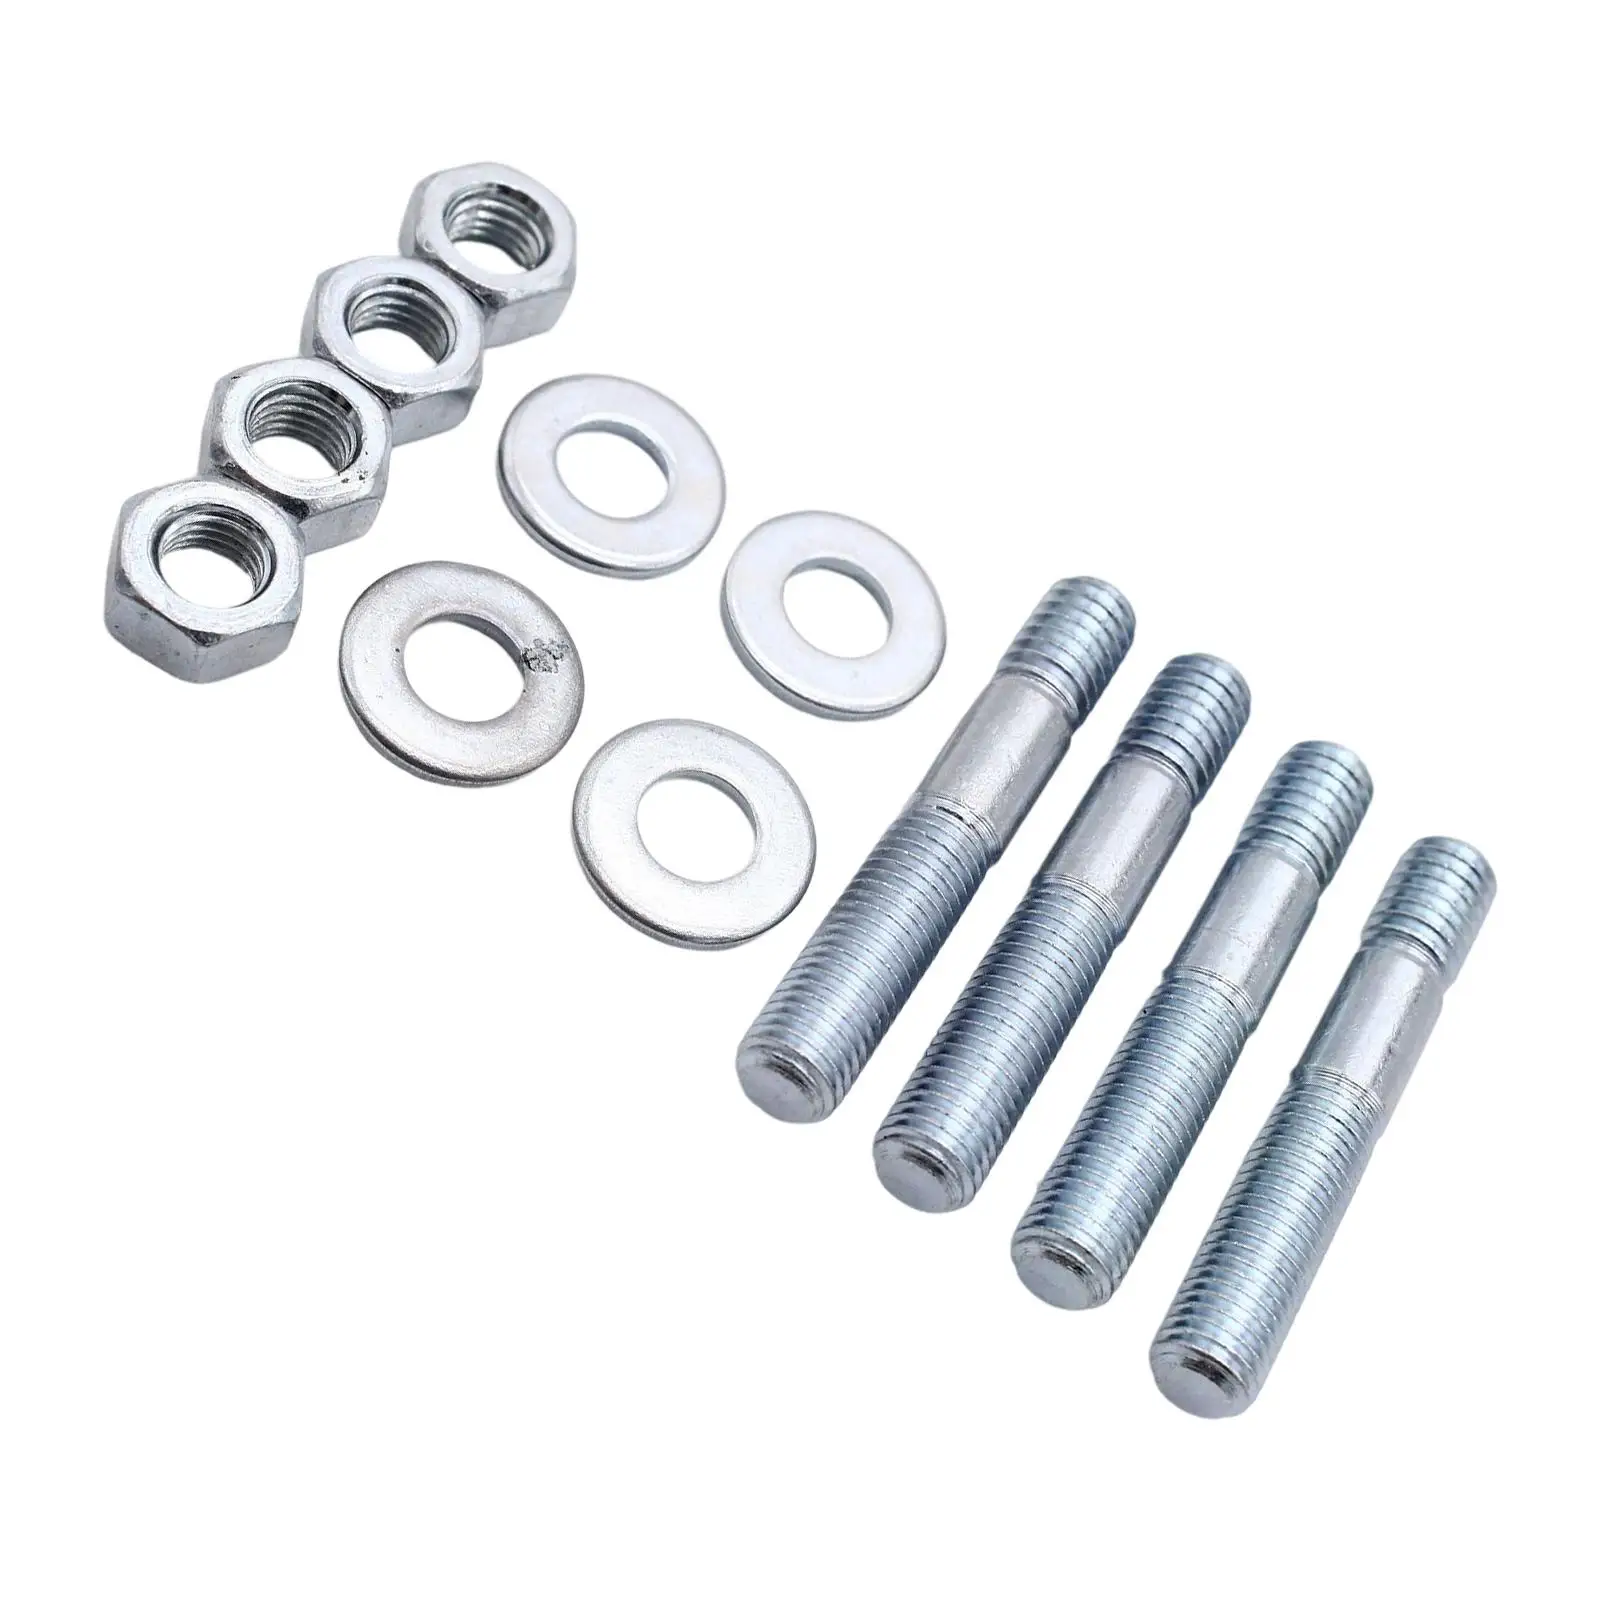 Car Carb Stud Kit Accessories 4 Studs 4 Washer Fit for